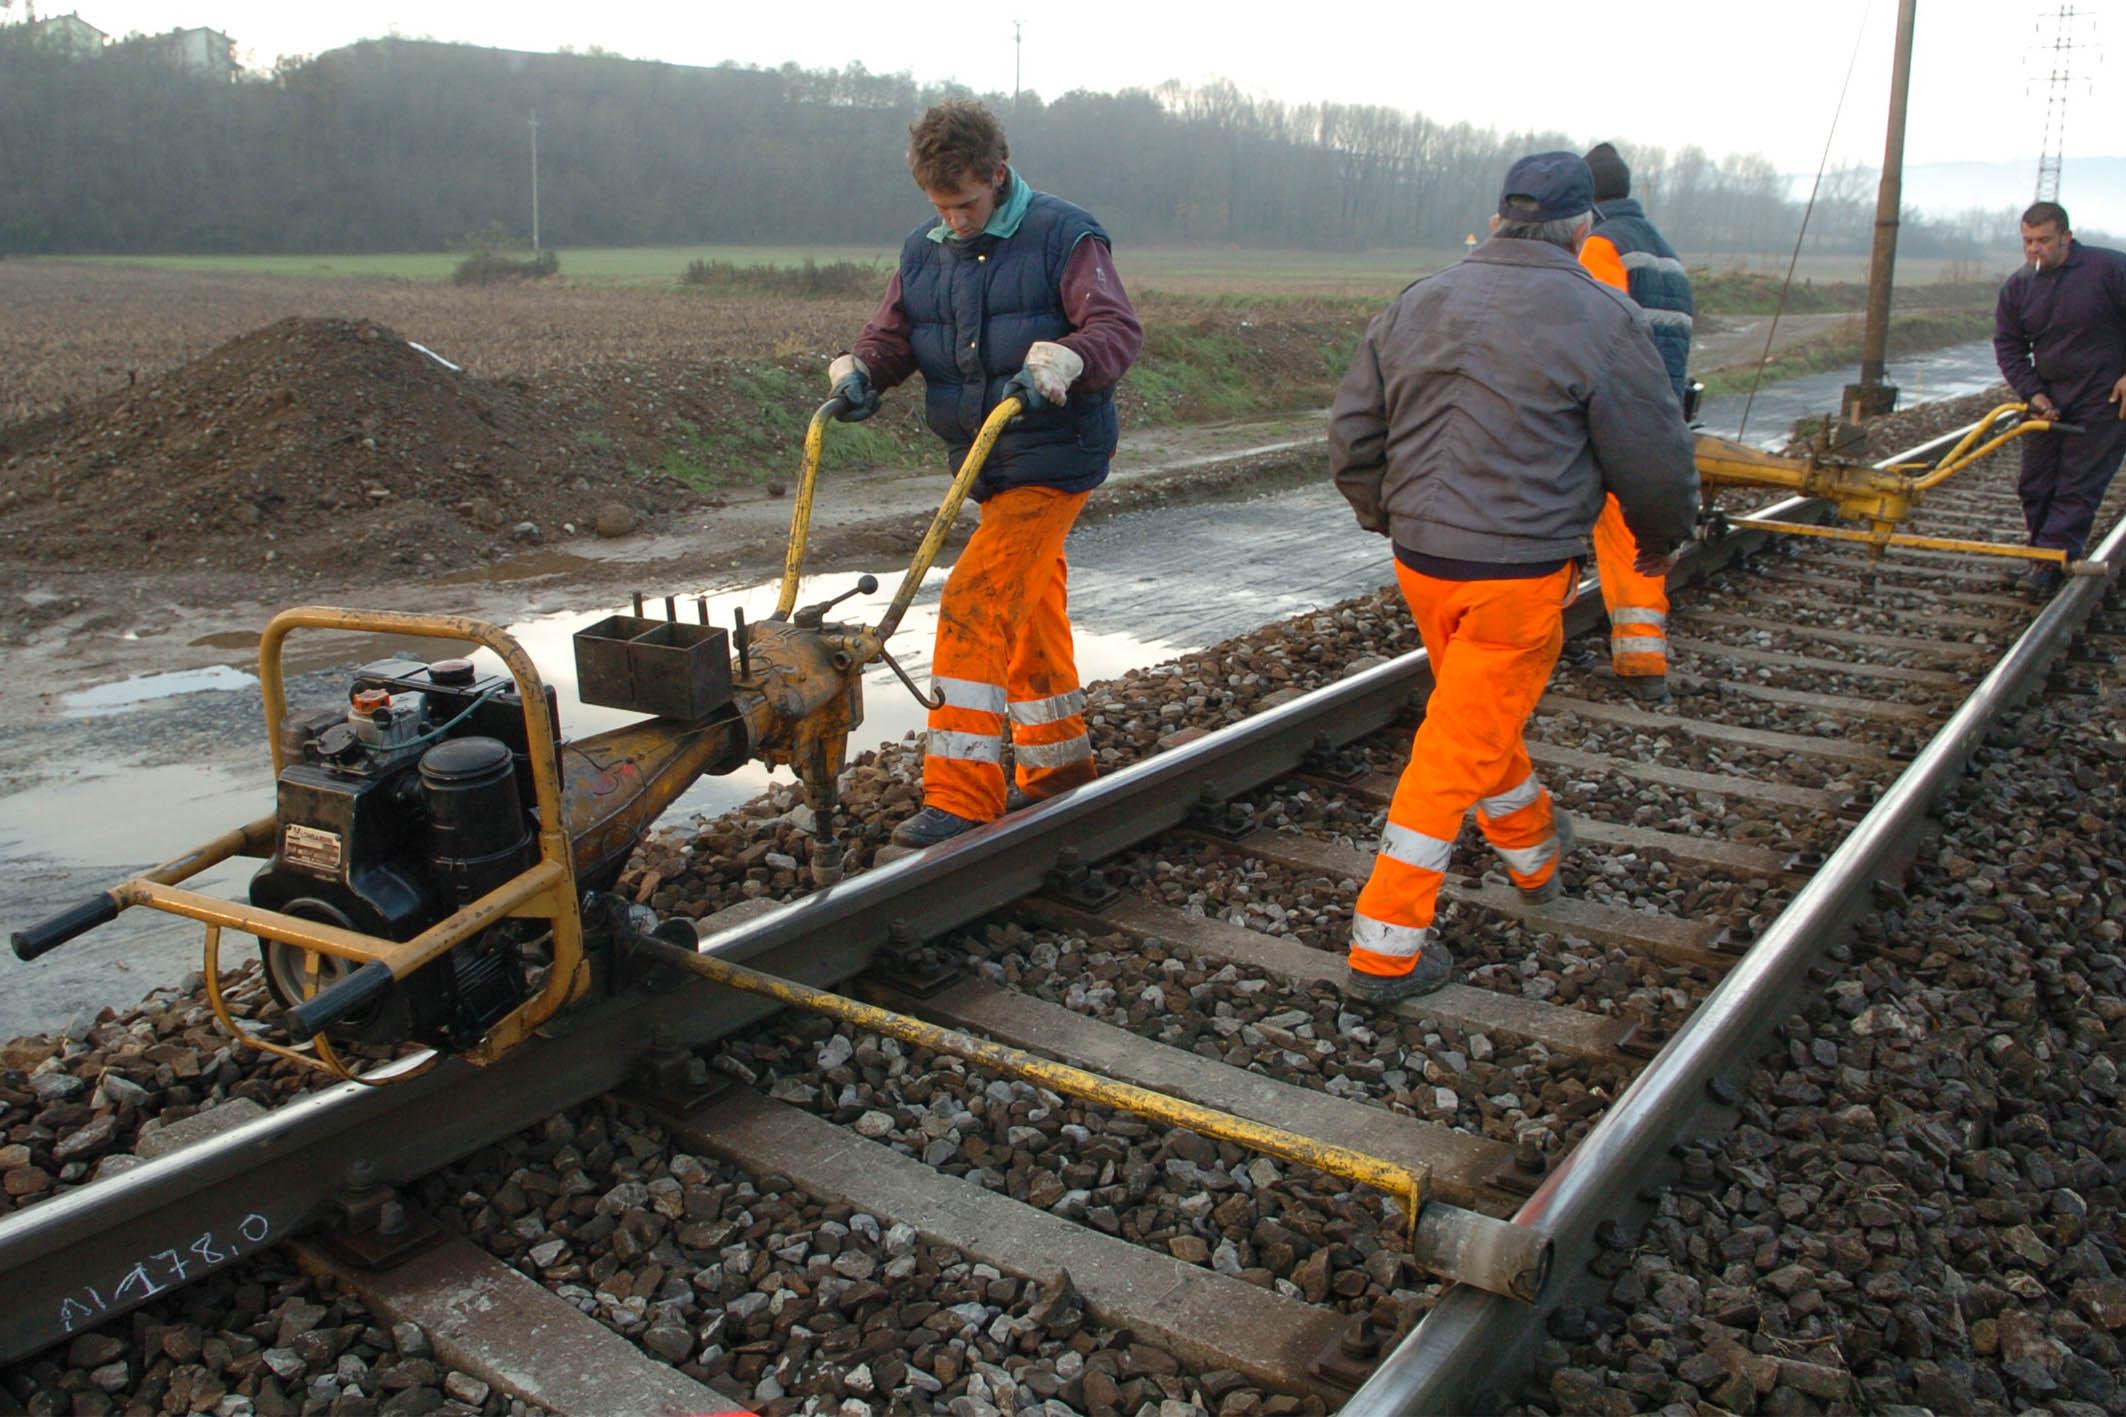 Work on the tracks, no trains between Pistoia and Montecatini on weekends.